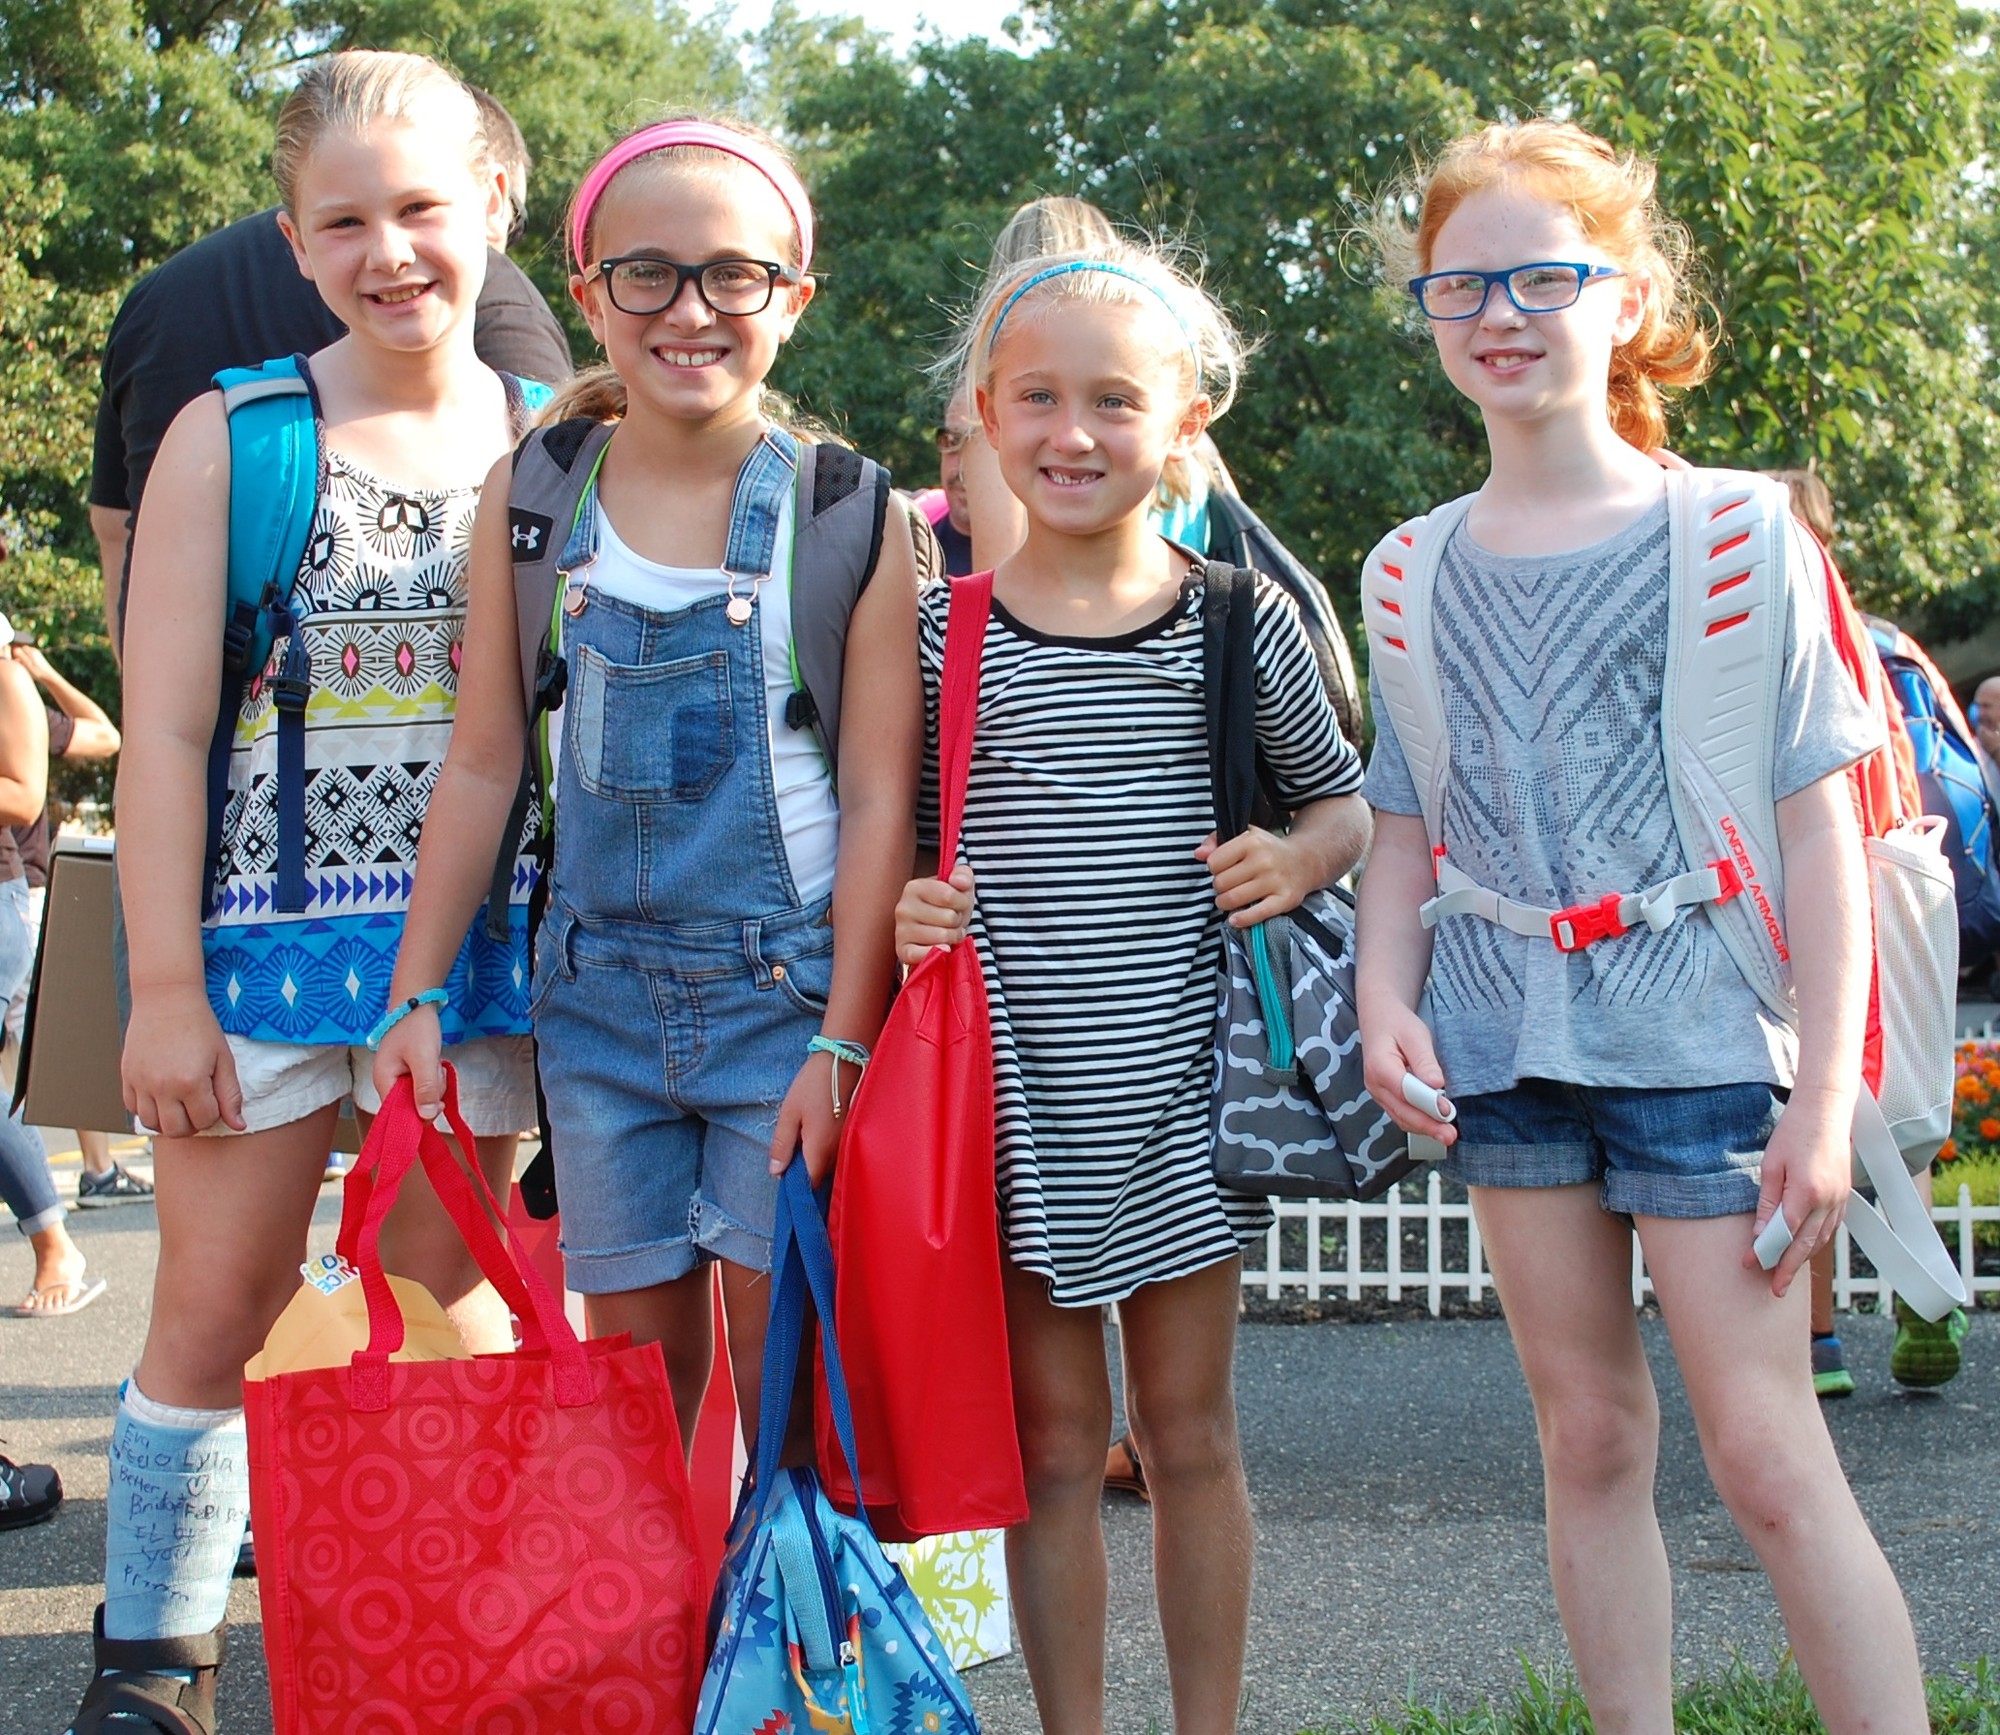 Nora Toscano, left, and Eva Ingrilli started fifth grade and Forest Lake, while it was the first day of third grade for Lyla Ingrilli and Bridget Toscano.